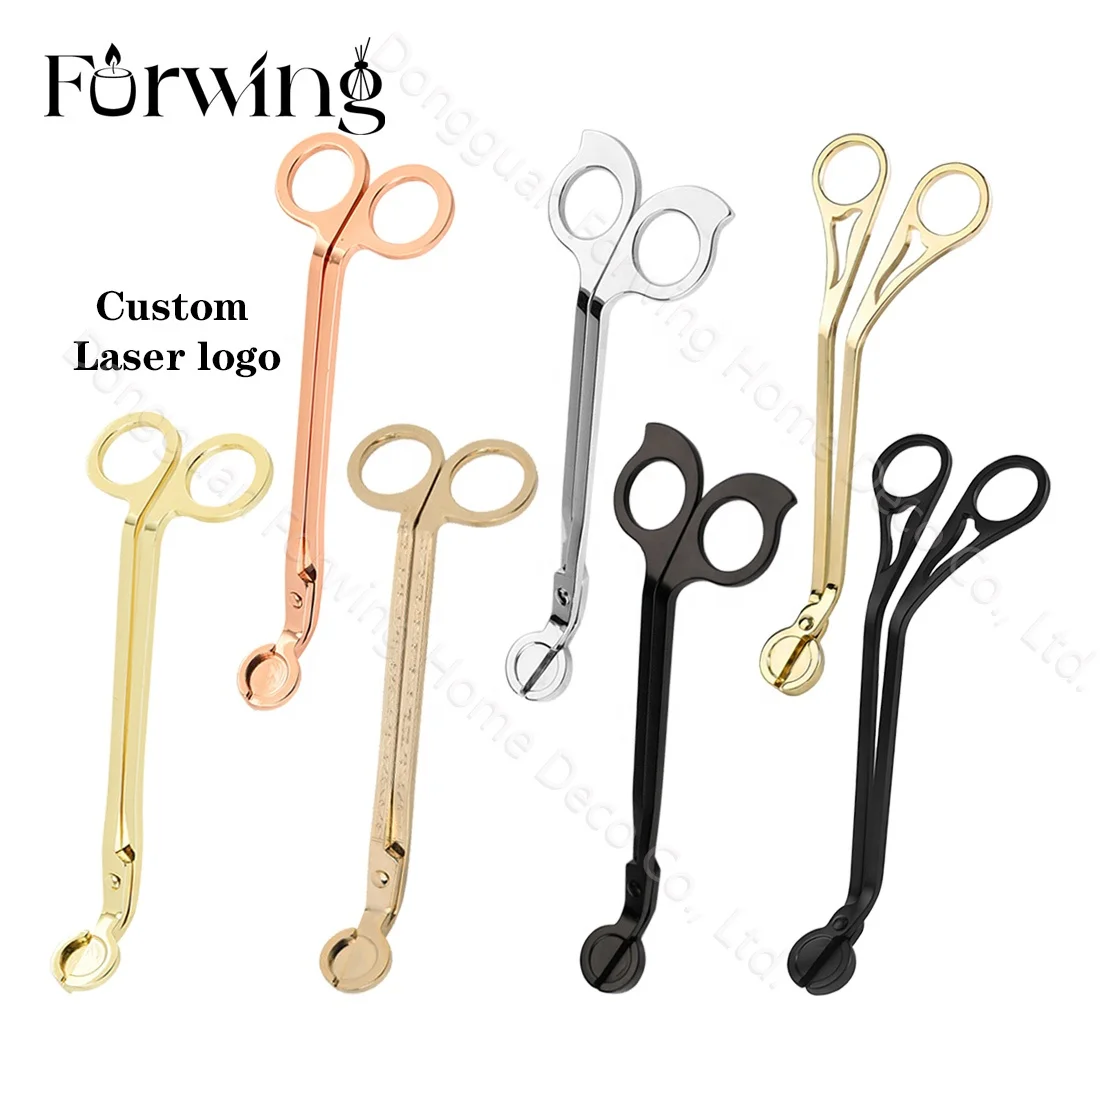 Candle scissors custom laser logo wick trimmer cutter stainless steel shears candle care tools kits candle accessory